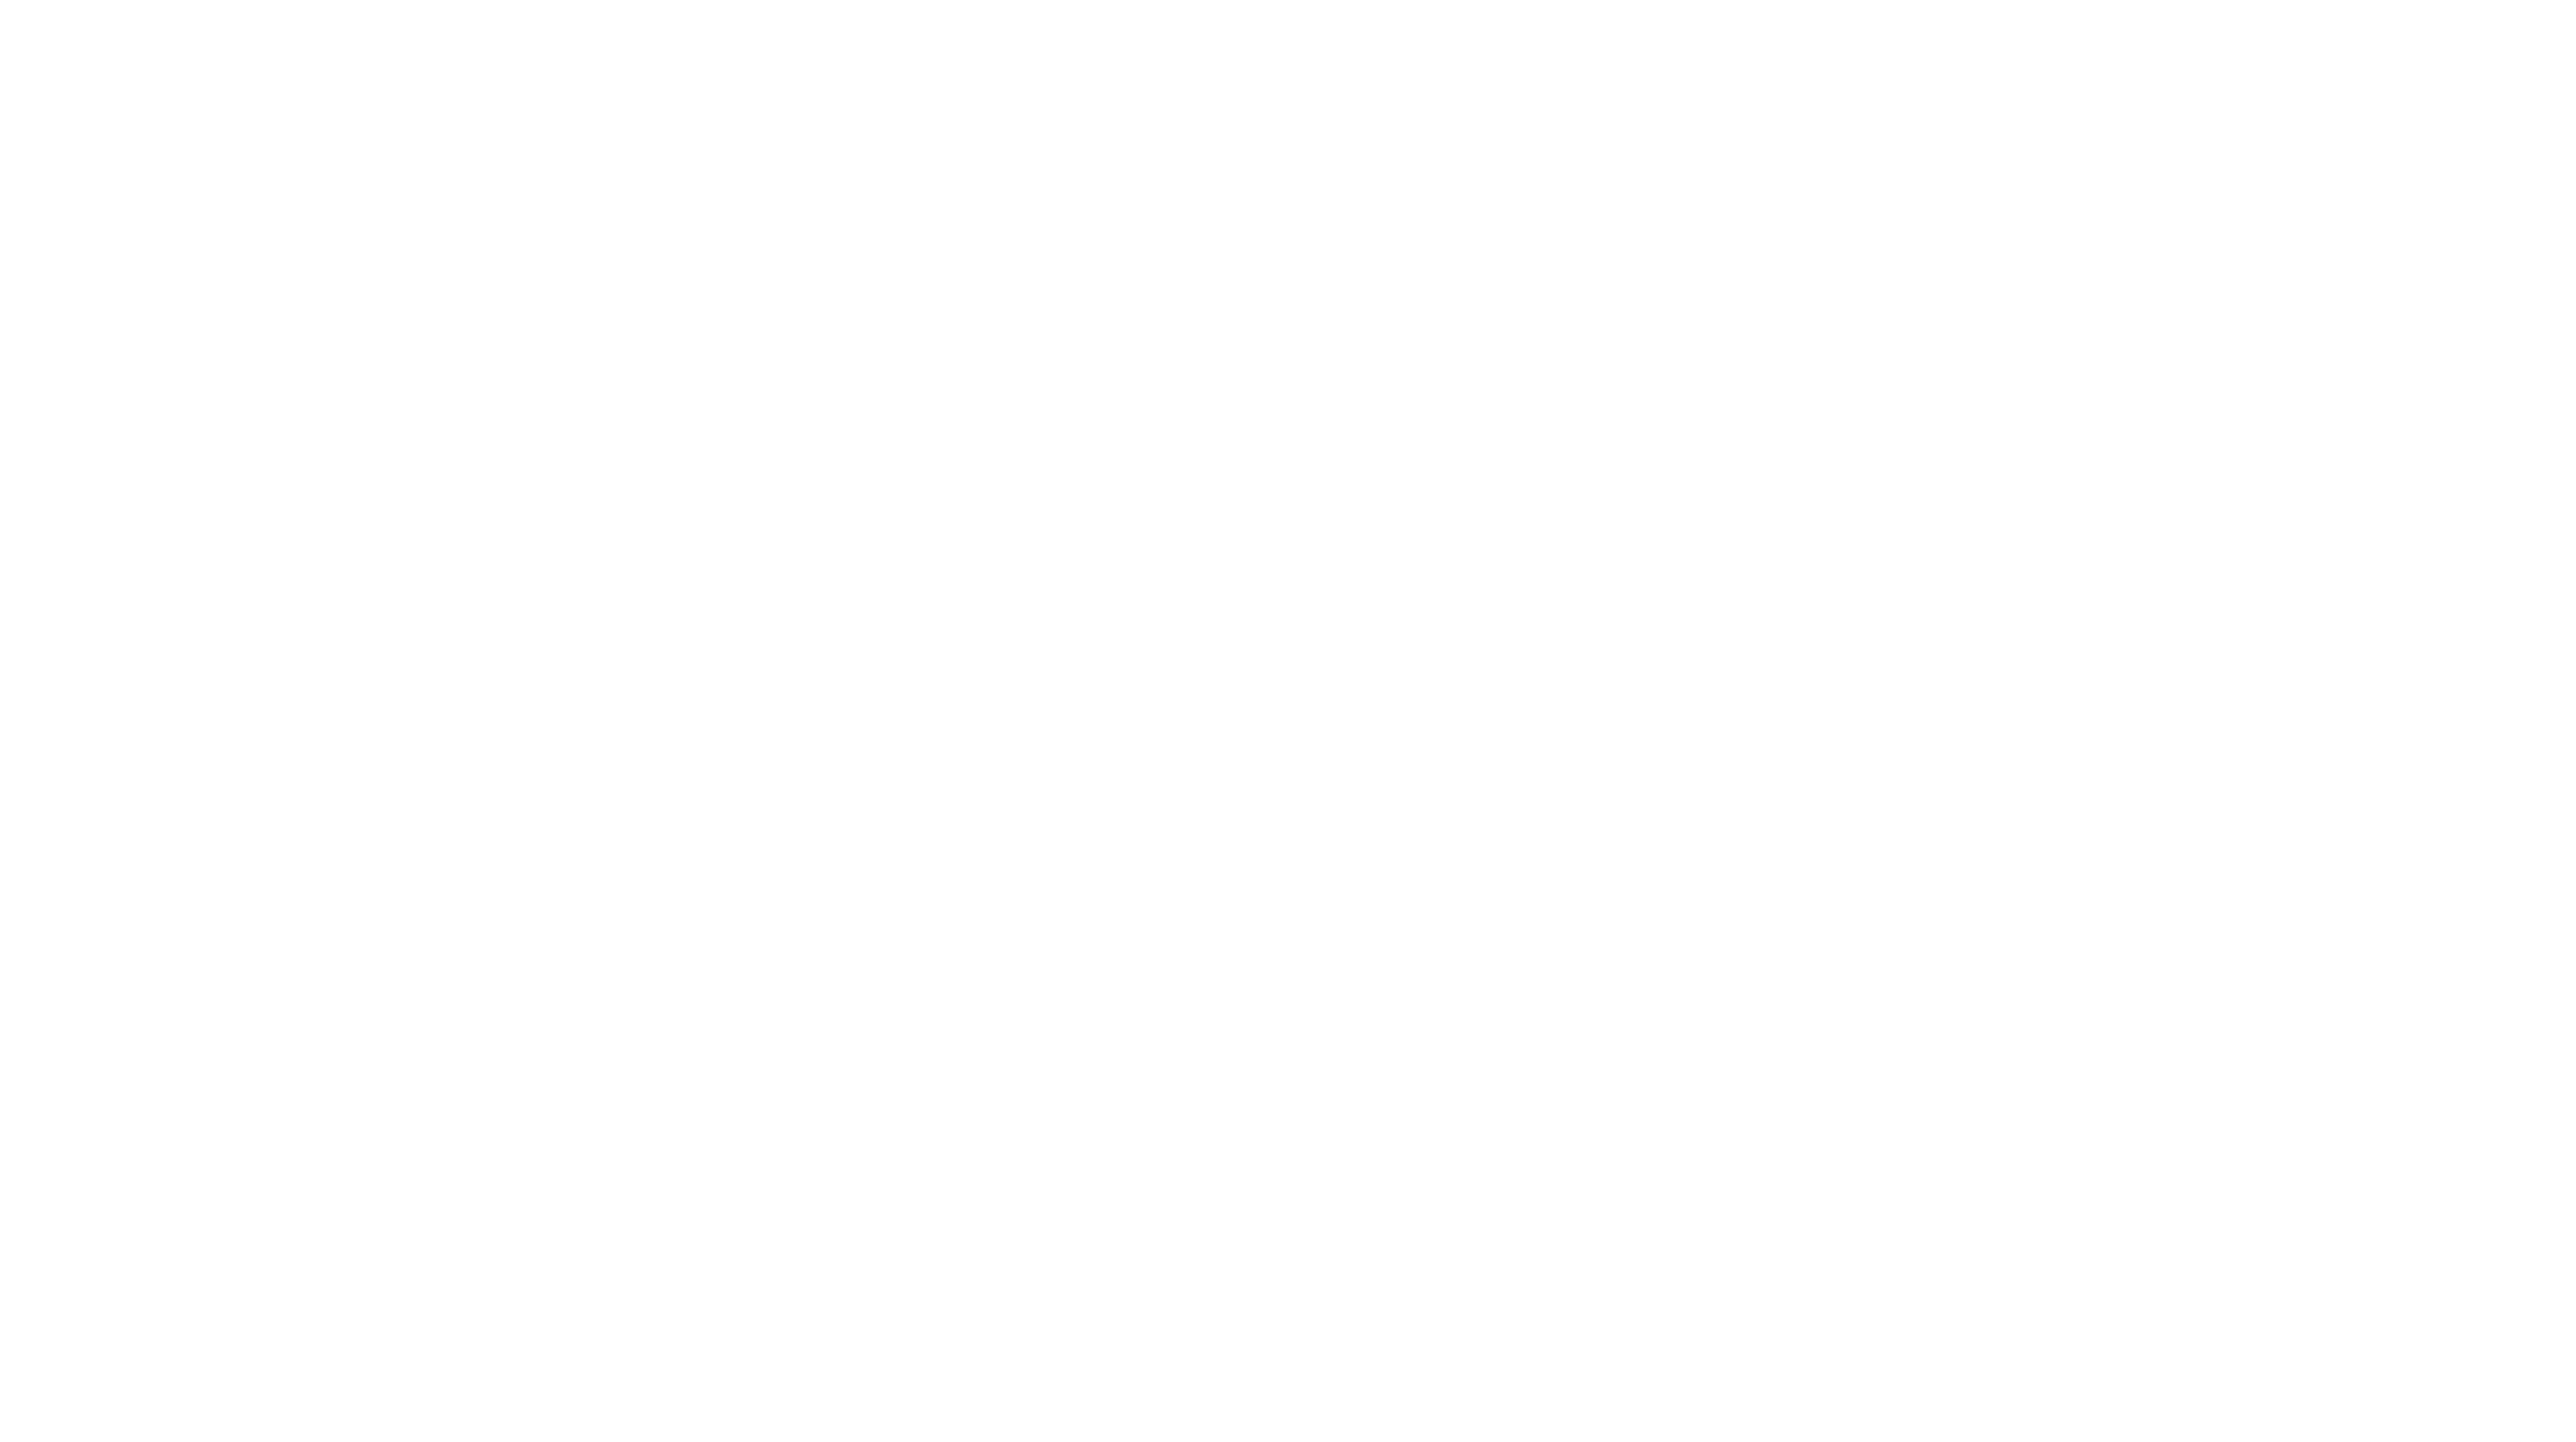 Diagram depicting how Clio works with MatterSnail